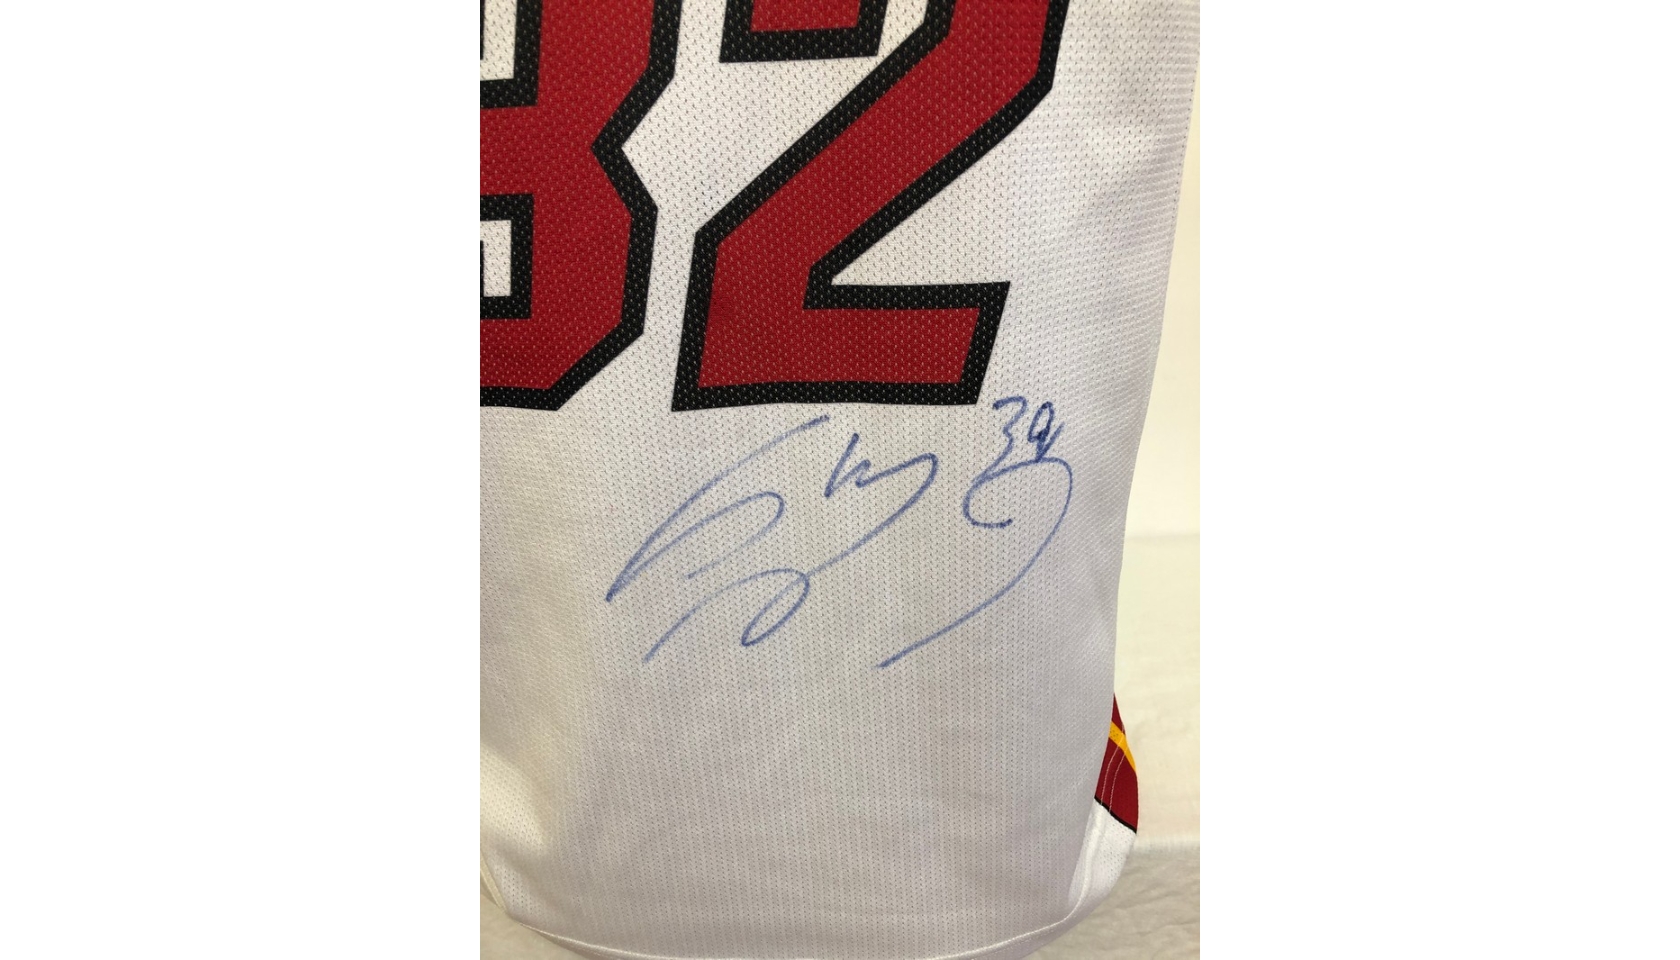 Miami Heat Jersey Signed by Shaquille O’Neal - CharityStars